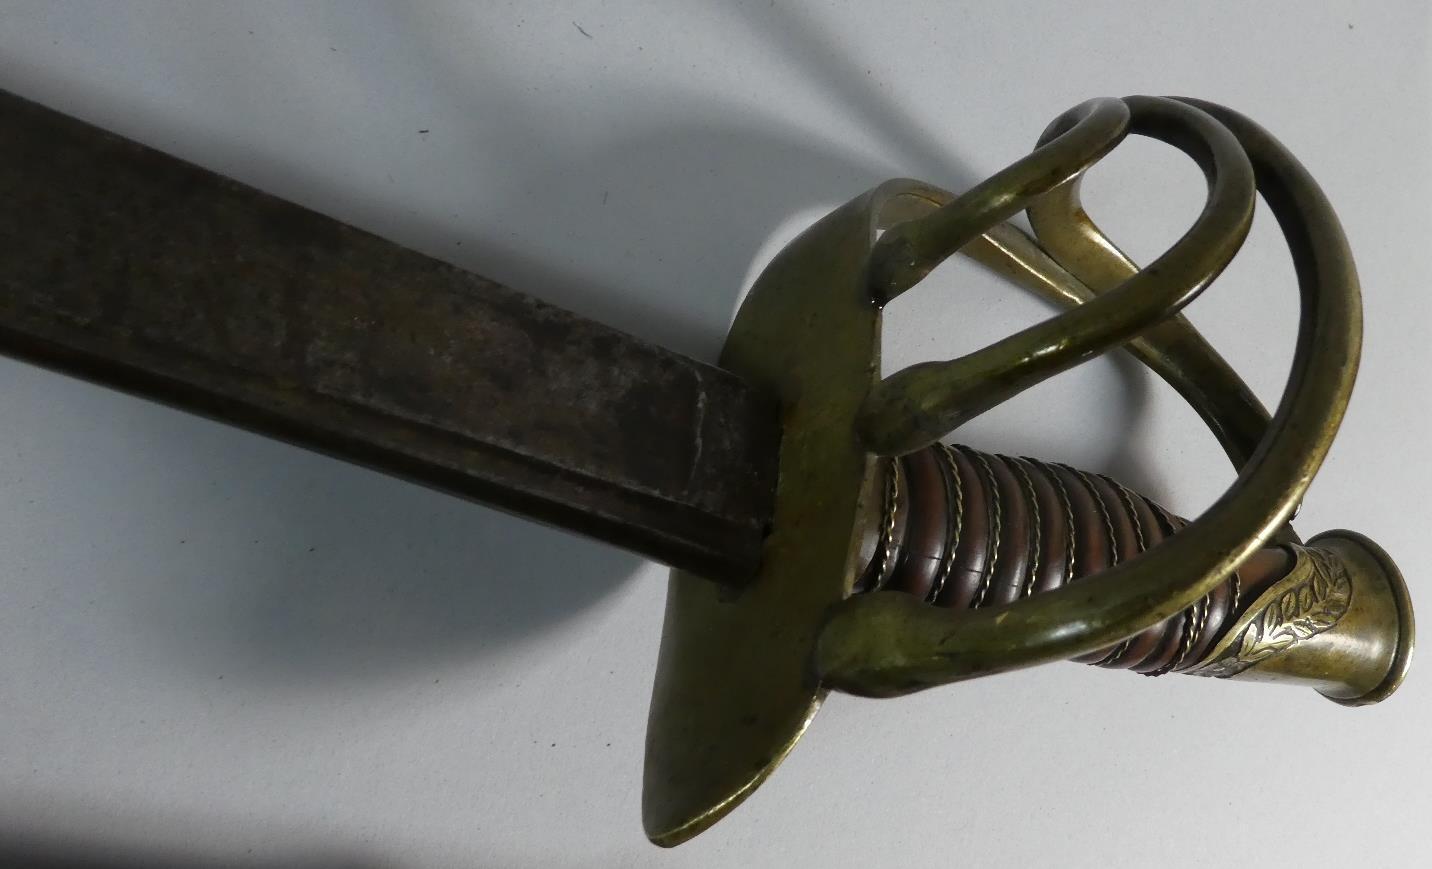 A 19th Century French Cavalry Sword with Wire Bound Grip and Brass Hilt. Shortened Blade, Steel - Image 4 of 5